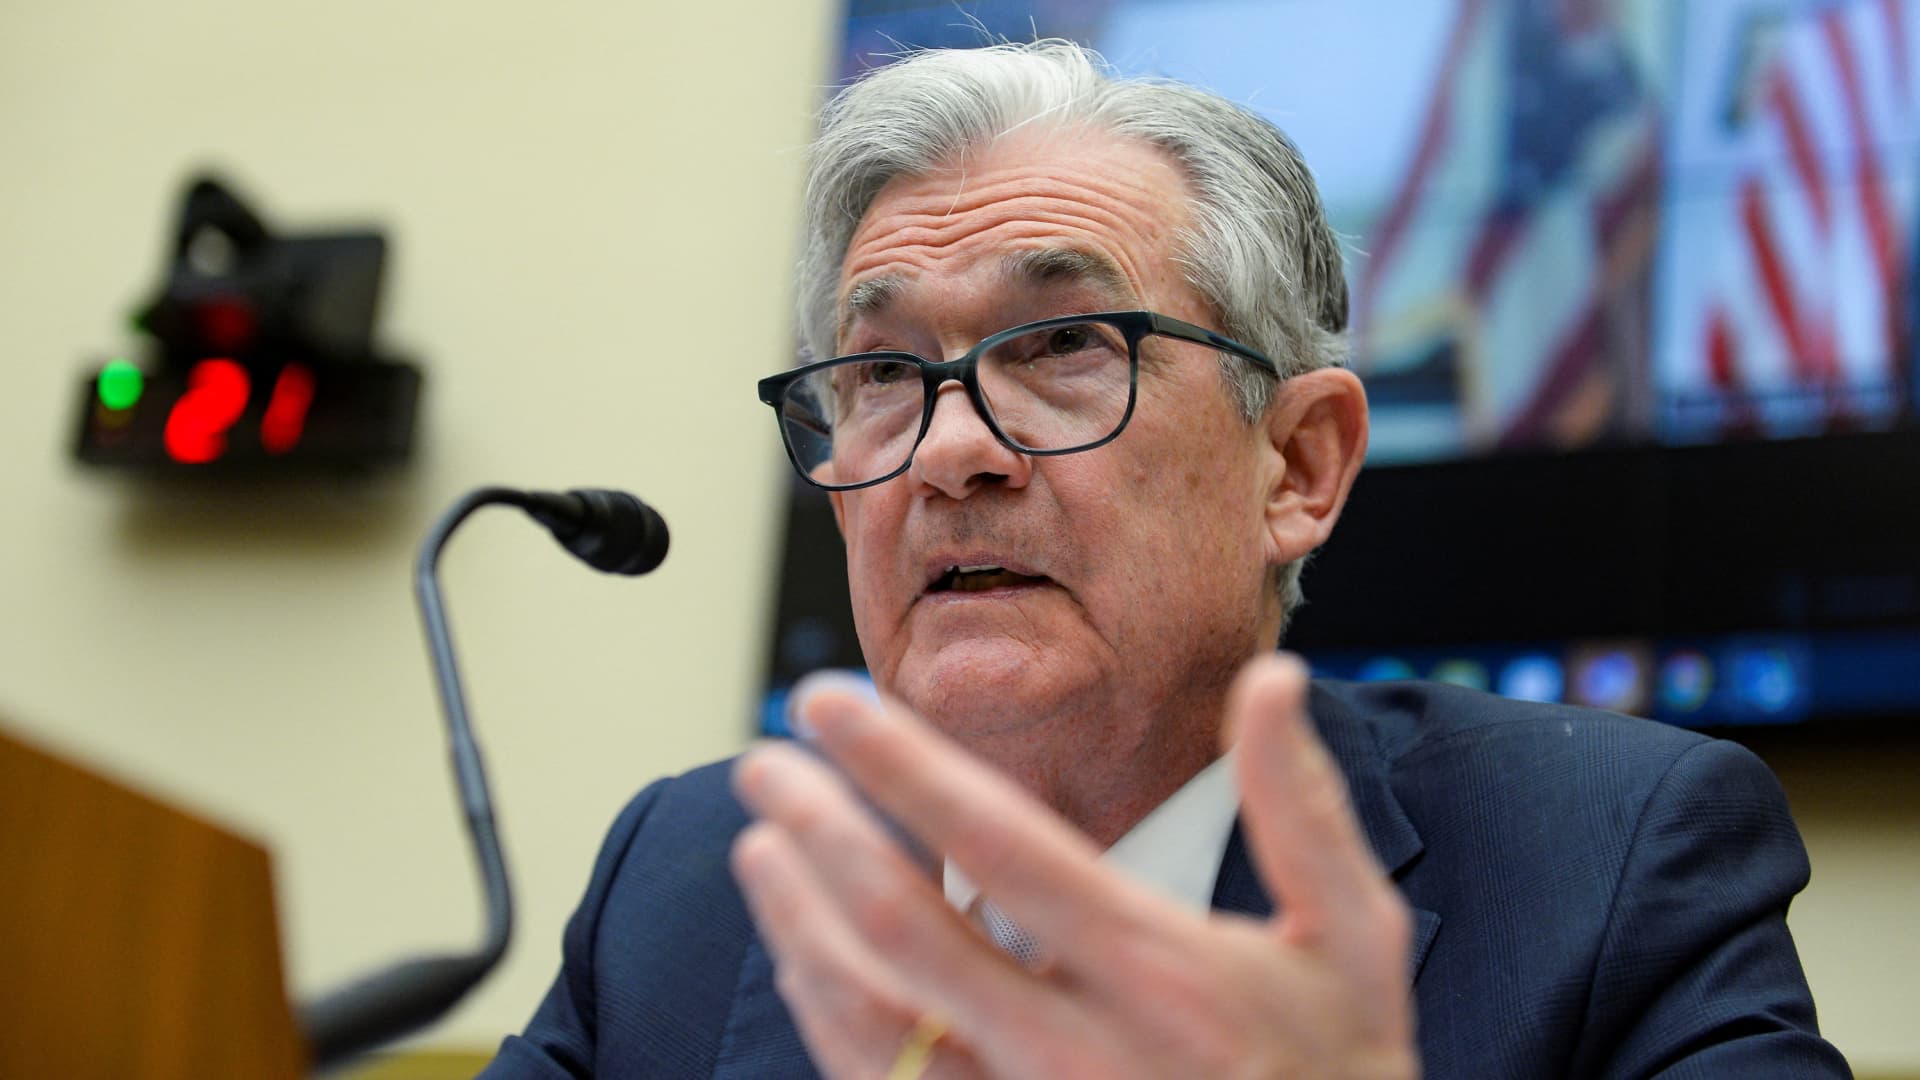 Powell vows to prevent inflation from taking hold in the U.S. for the long run